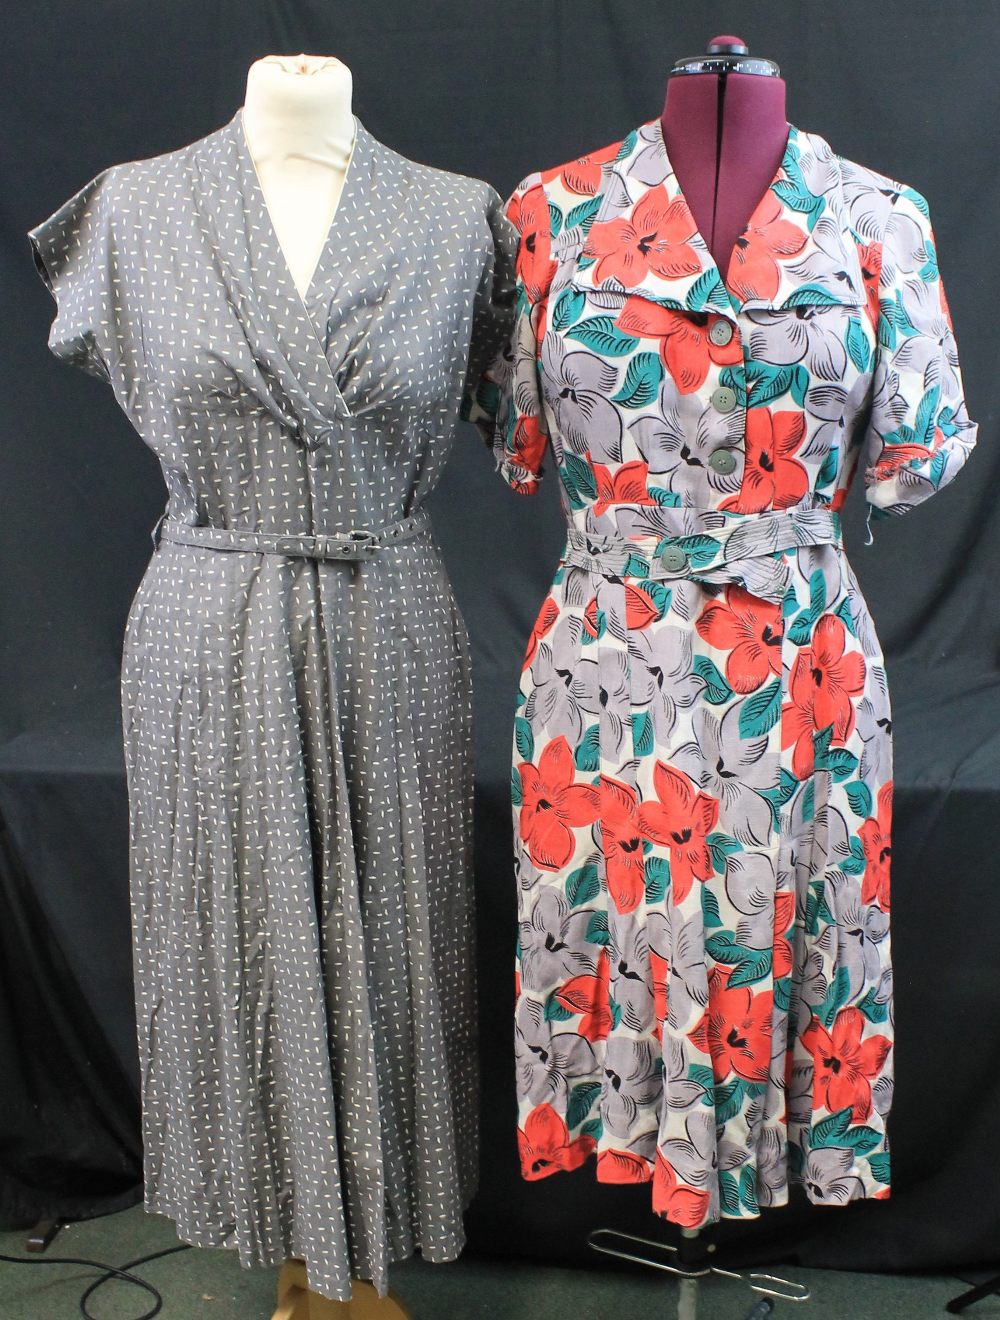 Collection of vintage dresses (40's-60's), to include: dark brown check empire line dress, - Image 2 of 5